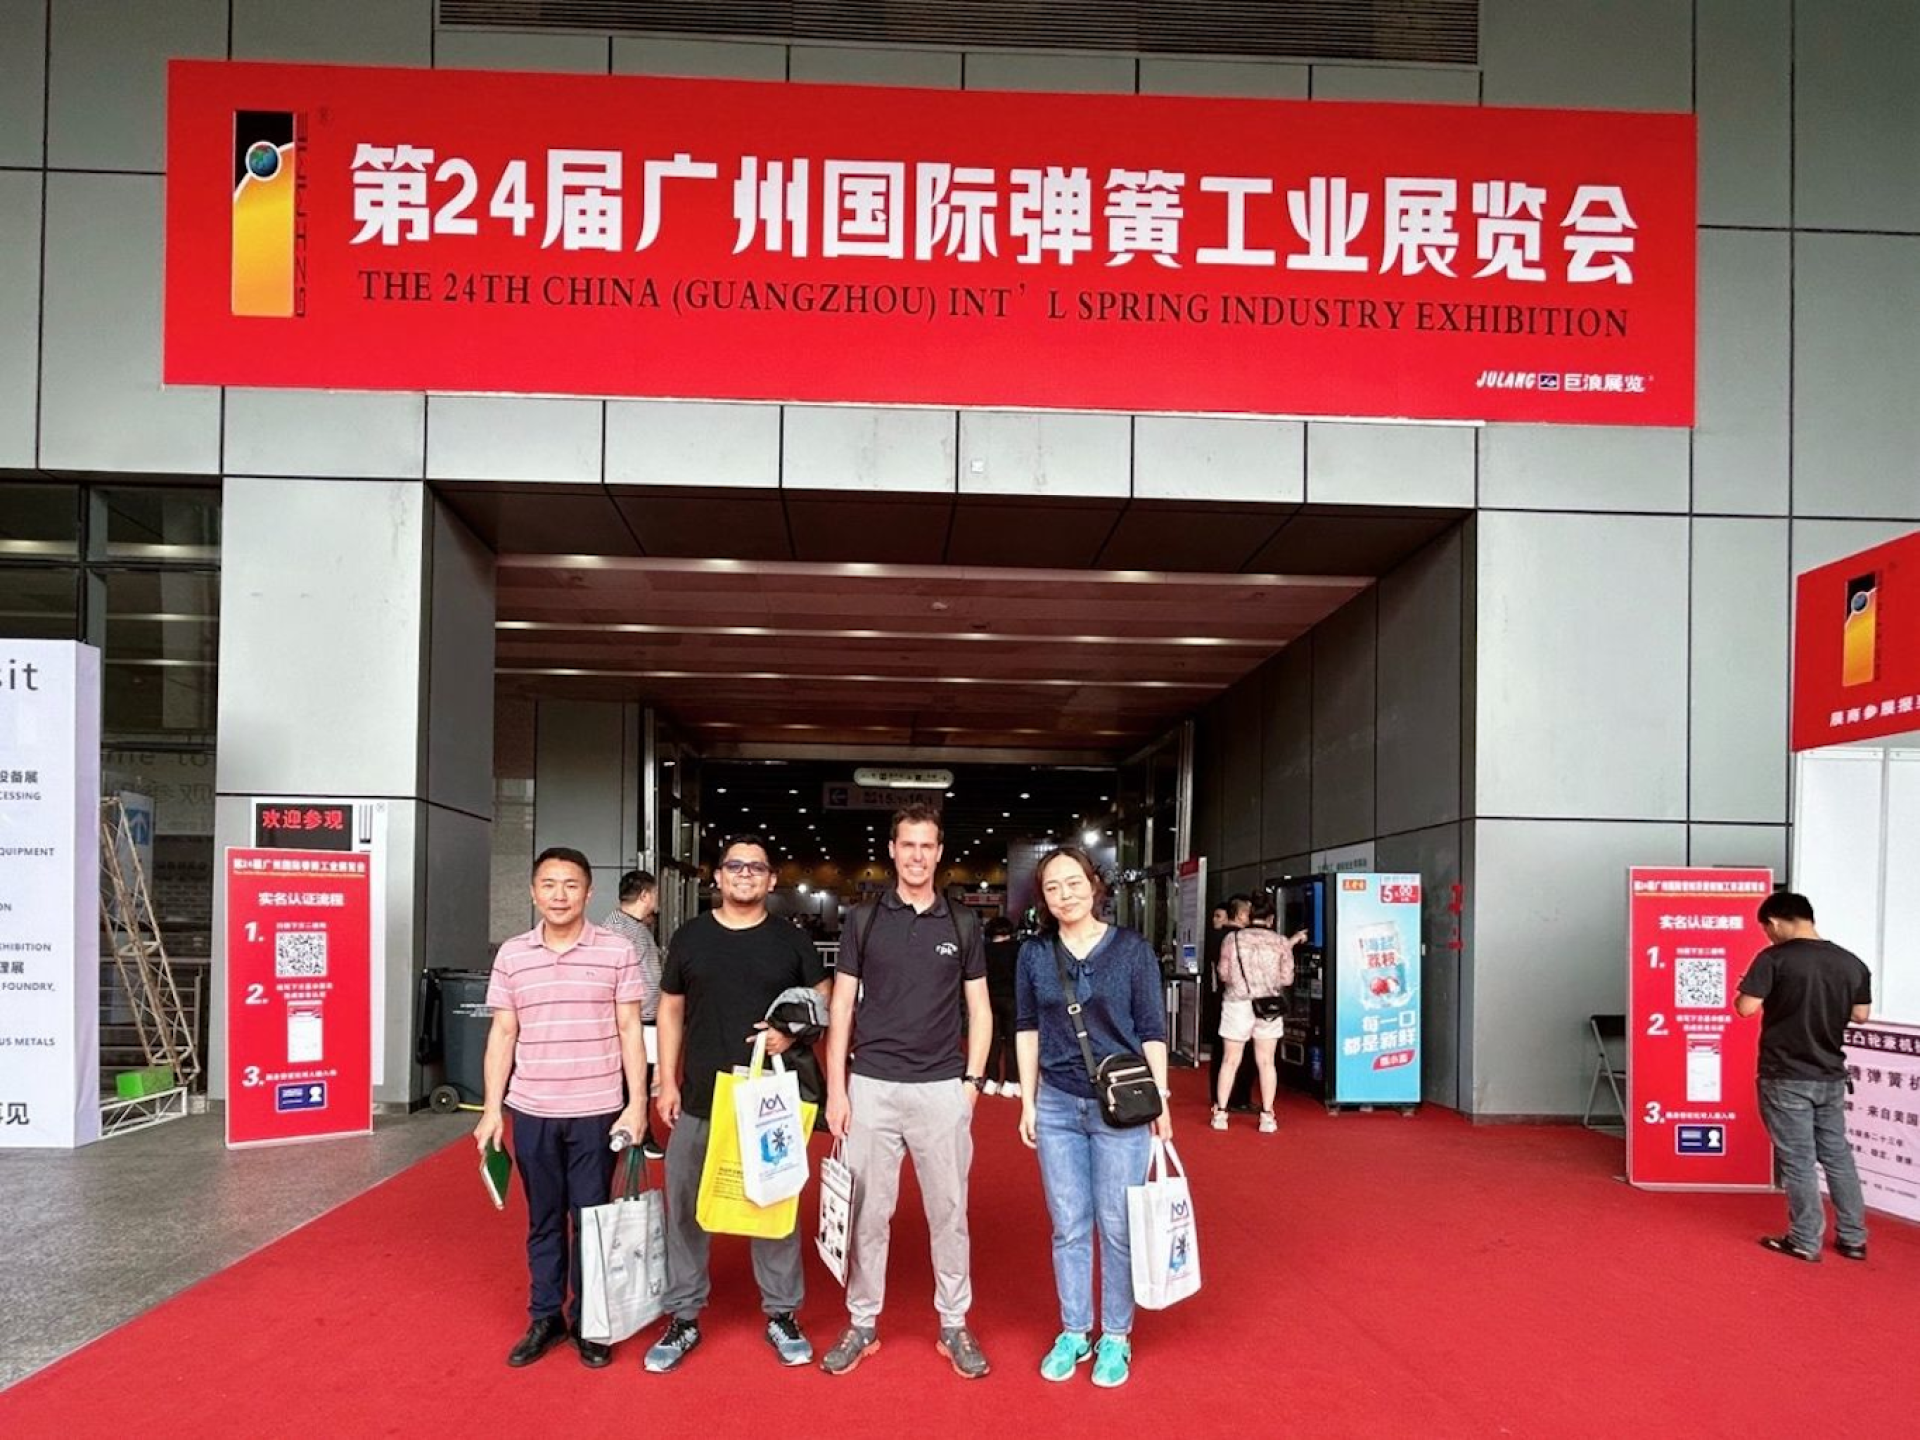 International Spring Industry Exhibition in Guangzhou